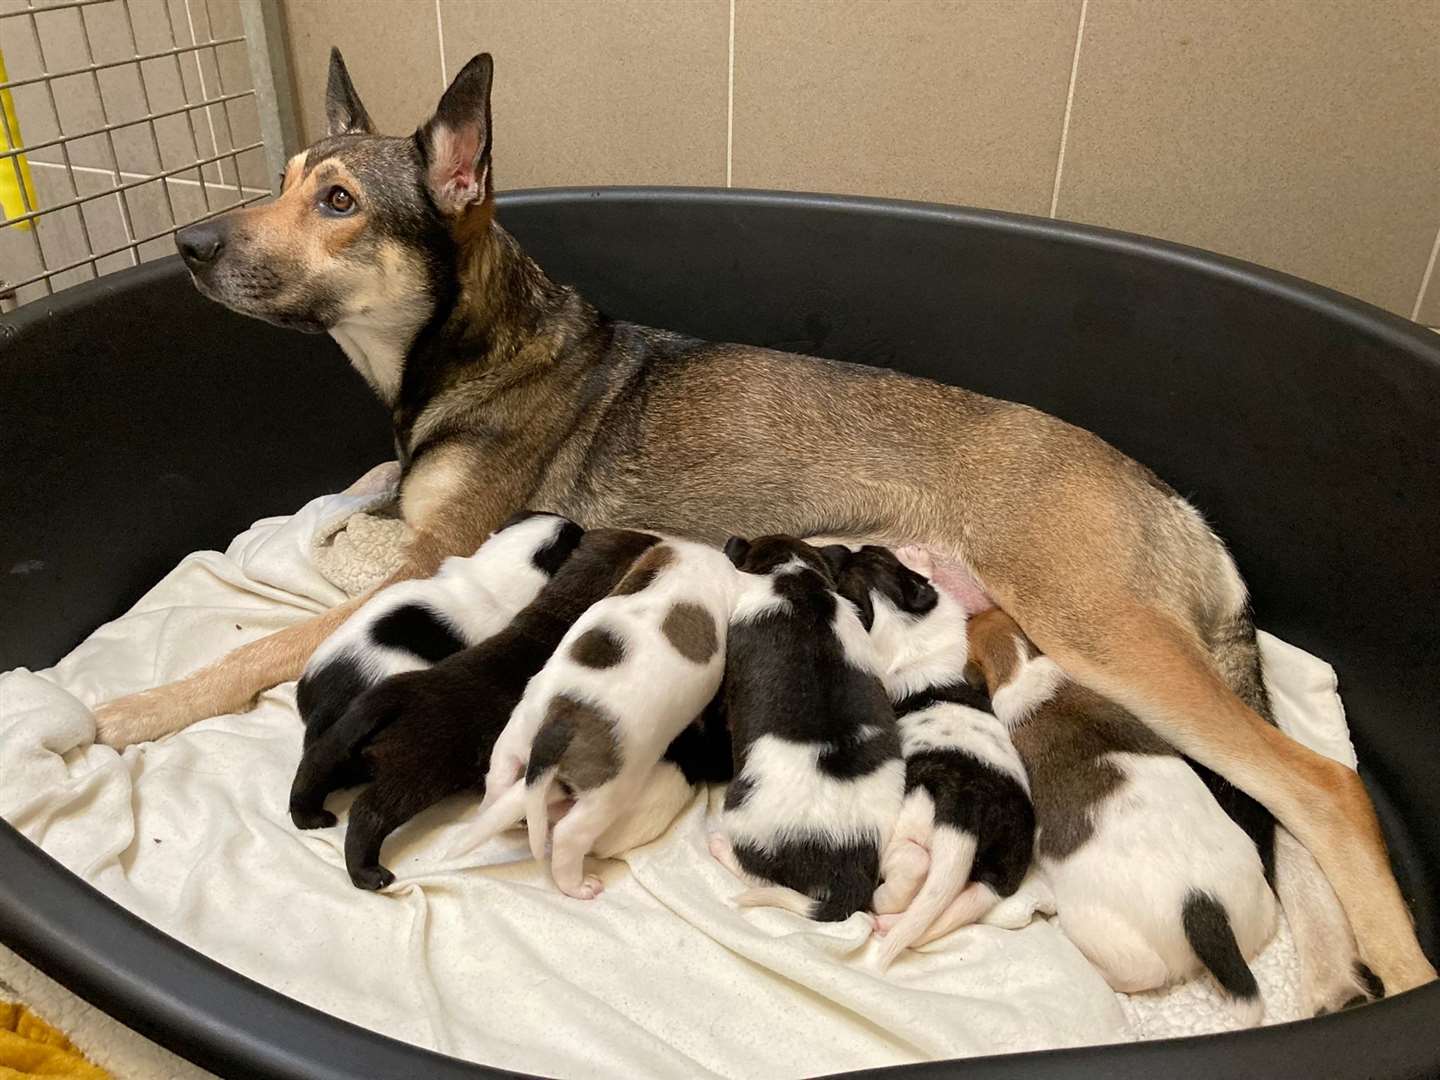 Darla and her puppies who came into the centre and have since been rehomed